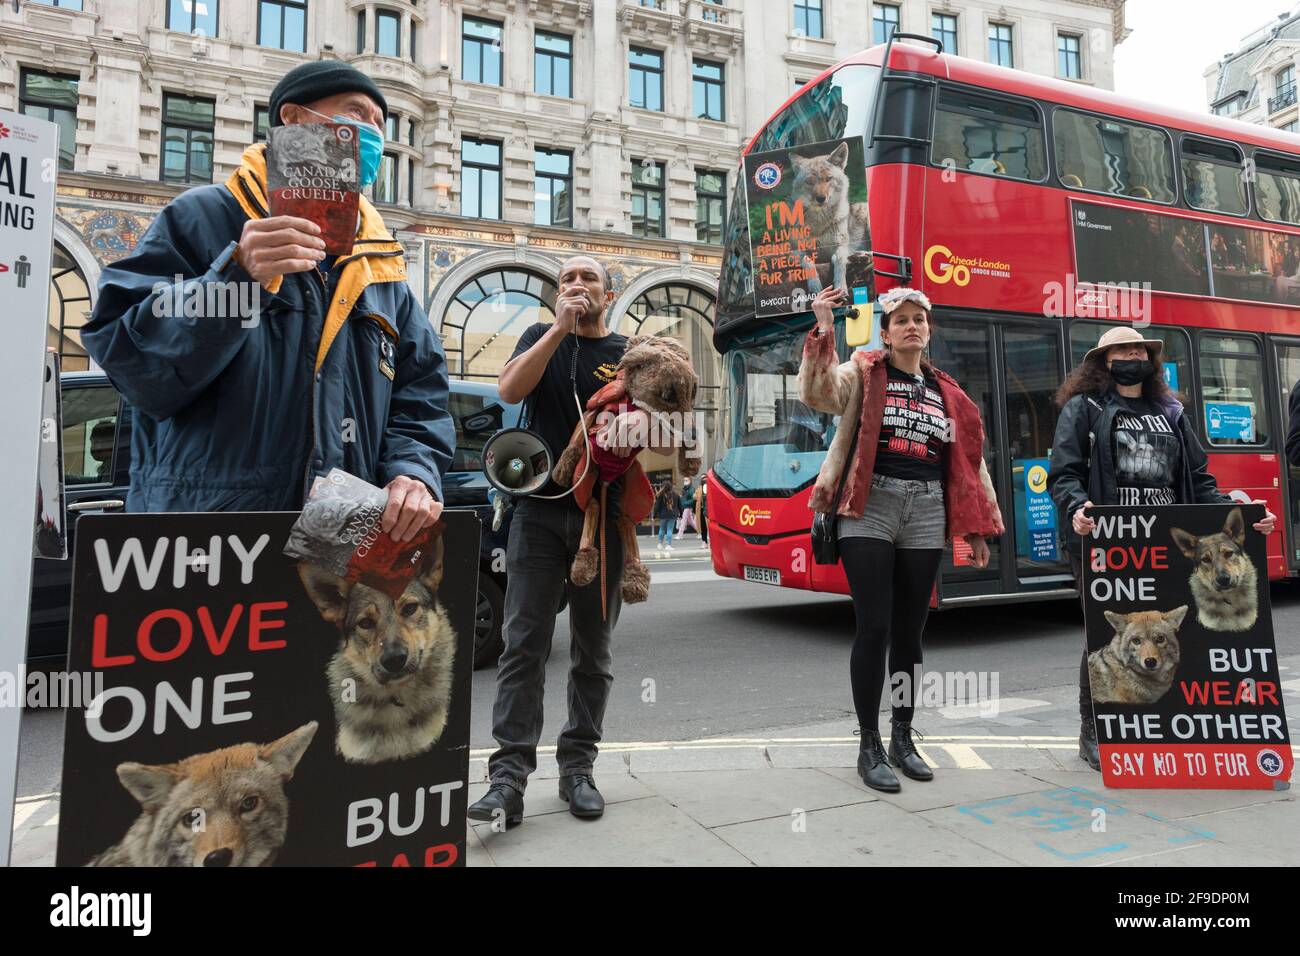 An activist speaks through a megaphone while colleagues seen holding  placards expressing their opinion during the demonstration.Animal cruelty  activists Peta UK (People for the Ethical Treatment of Animals) protest  against the inhumane